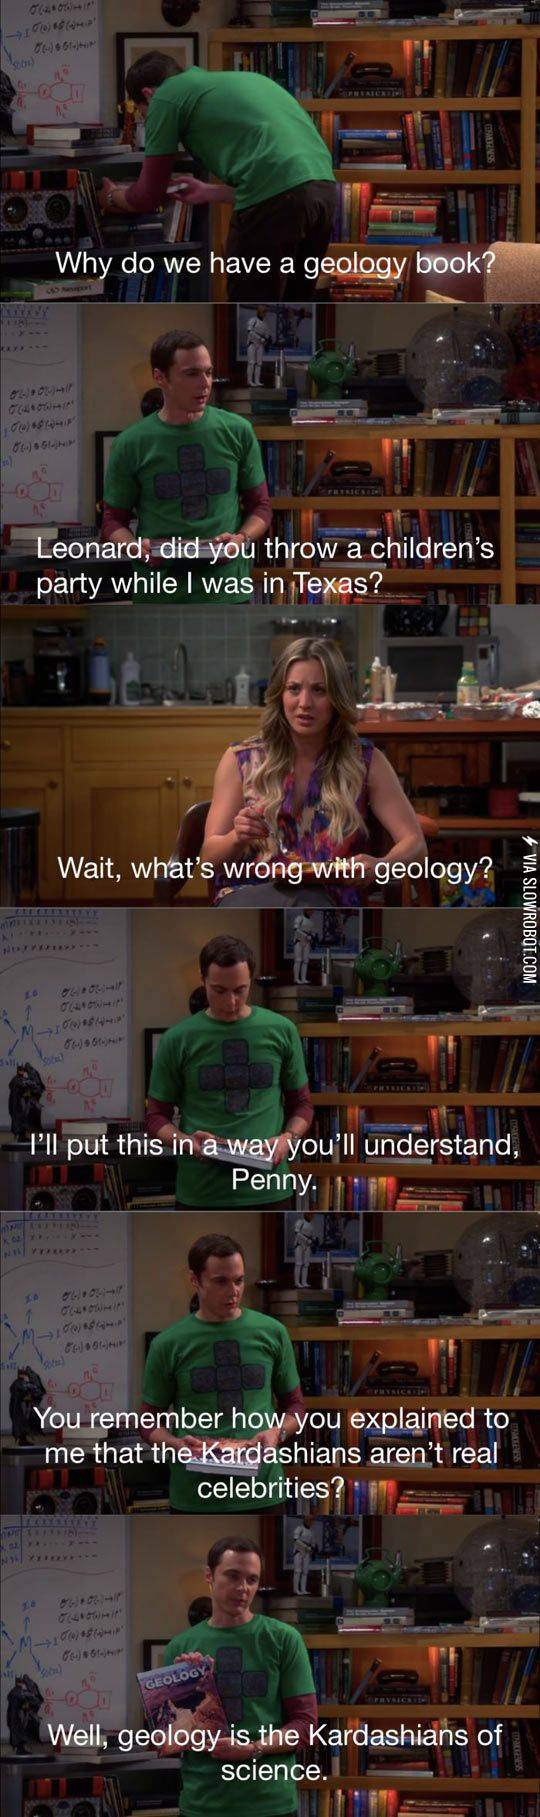 Geology+is+the+Kardashians+of+science.